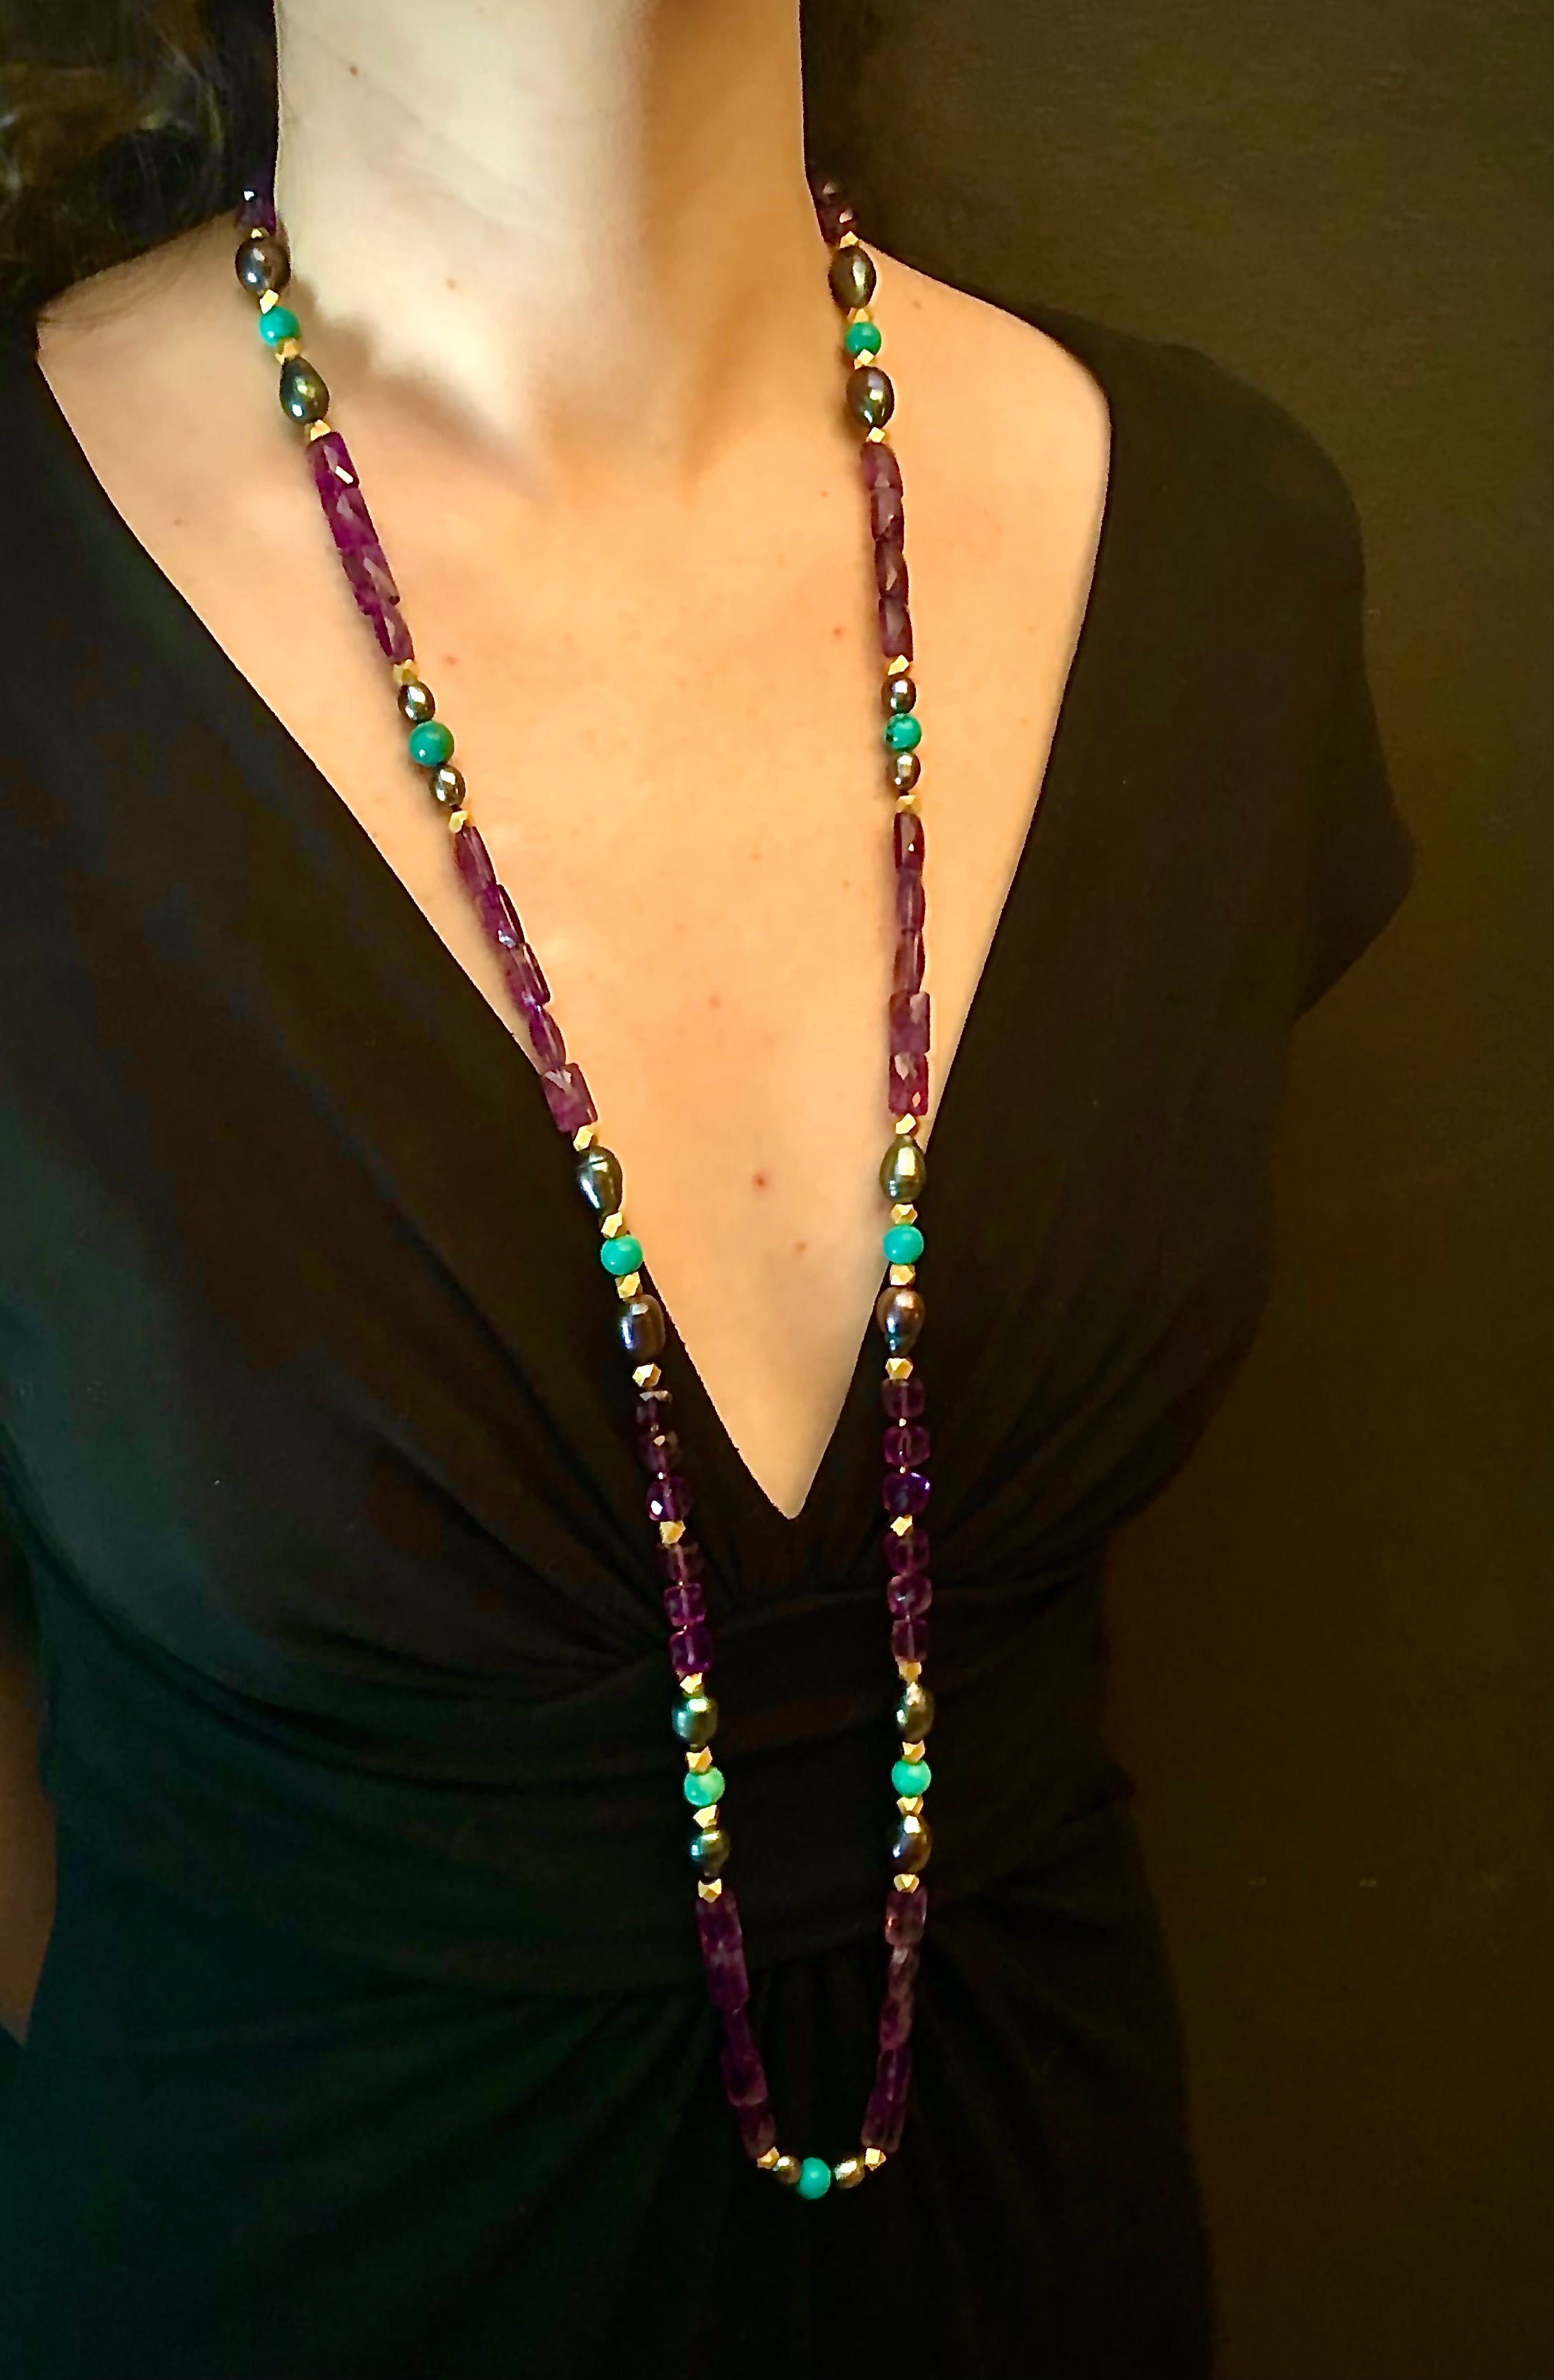 Amethyst, turquoise and black pearl necklace